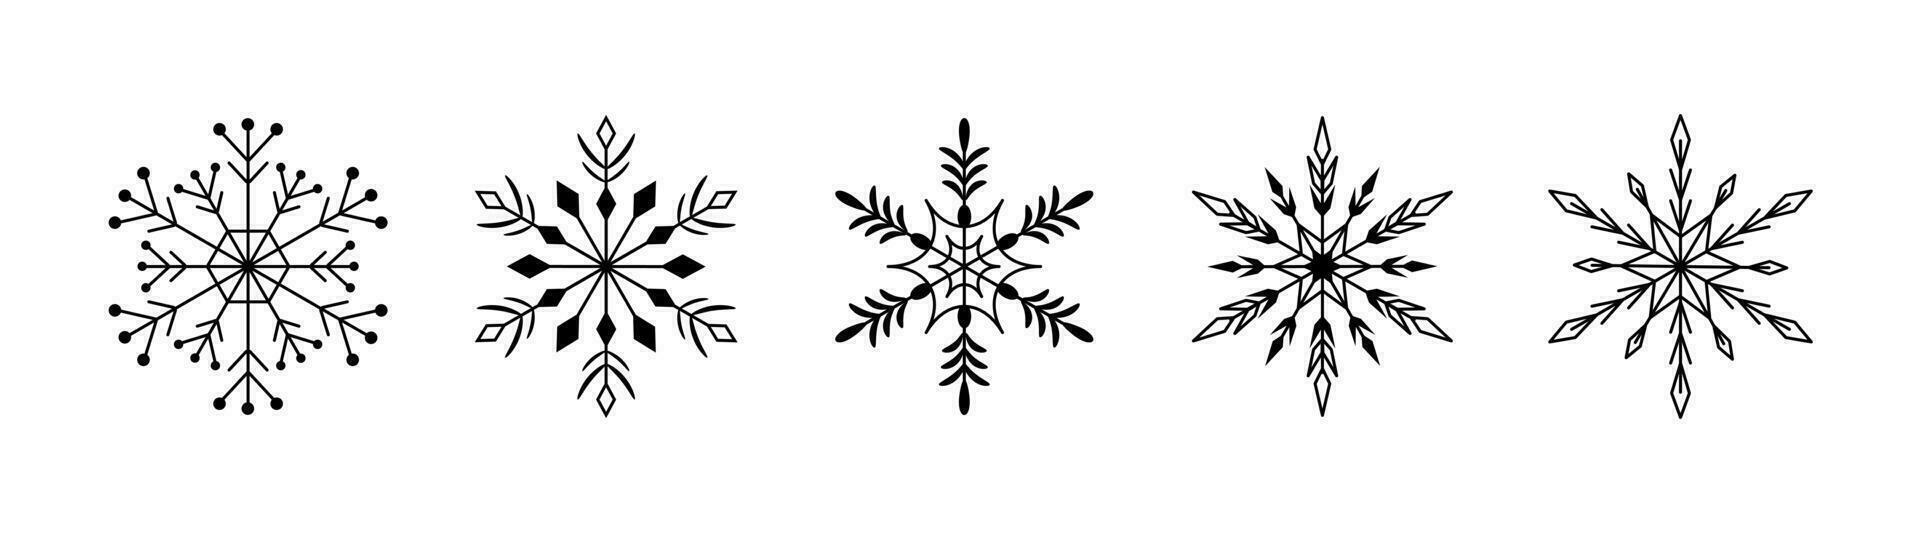 Set of snowflakes. Snowflakes icons isolated on white background. vector